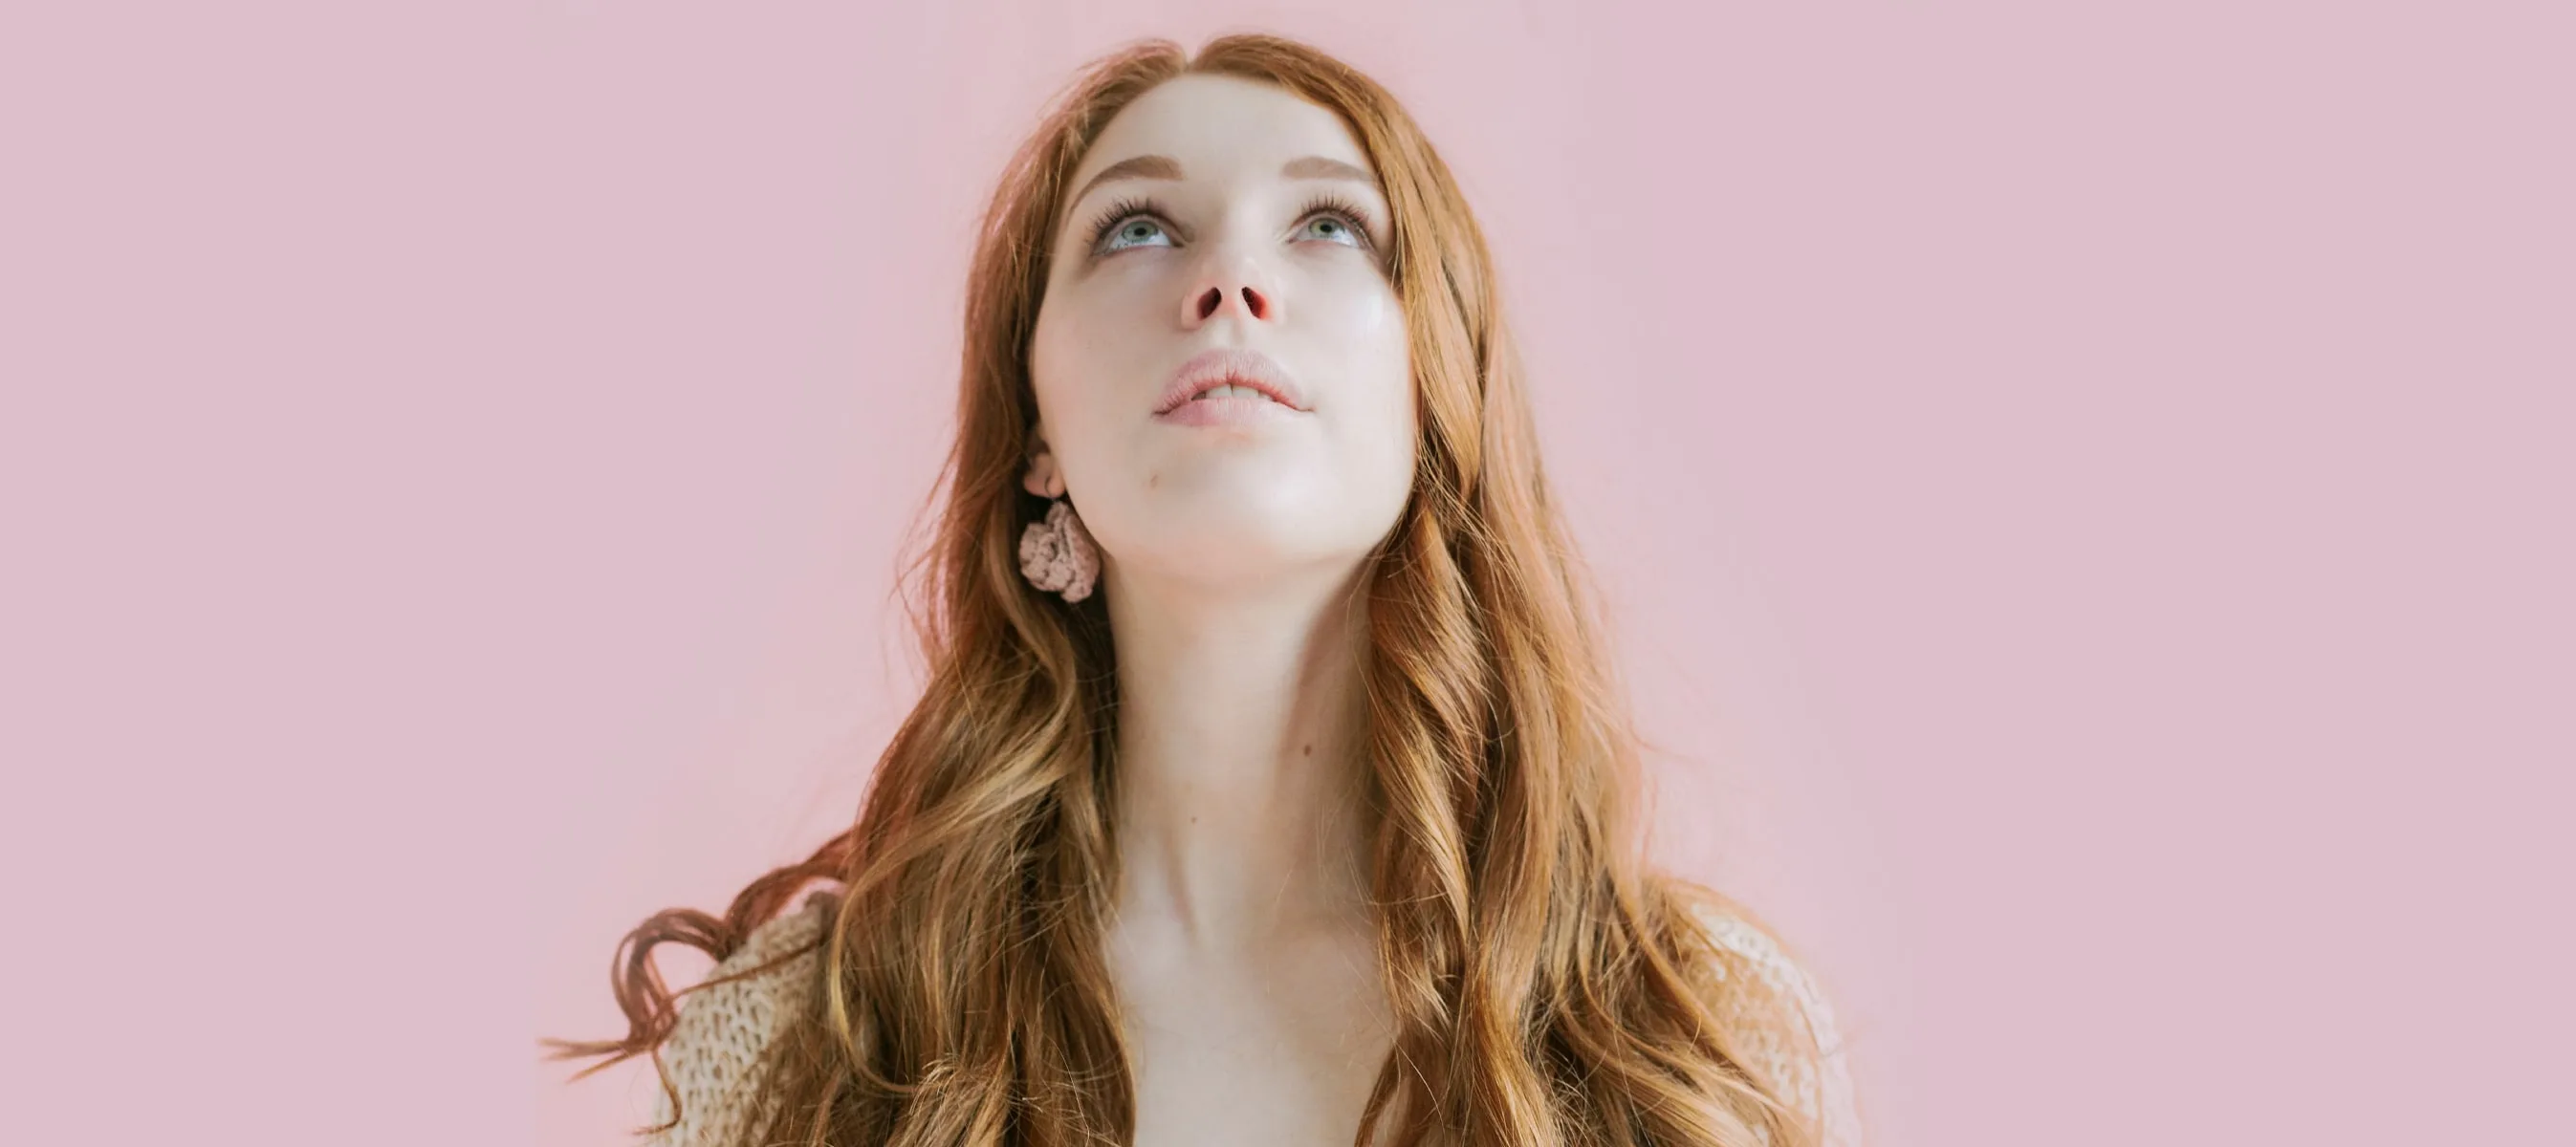 Fair skinned girl with long red hair looking up. Pink background.